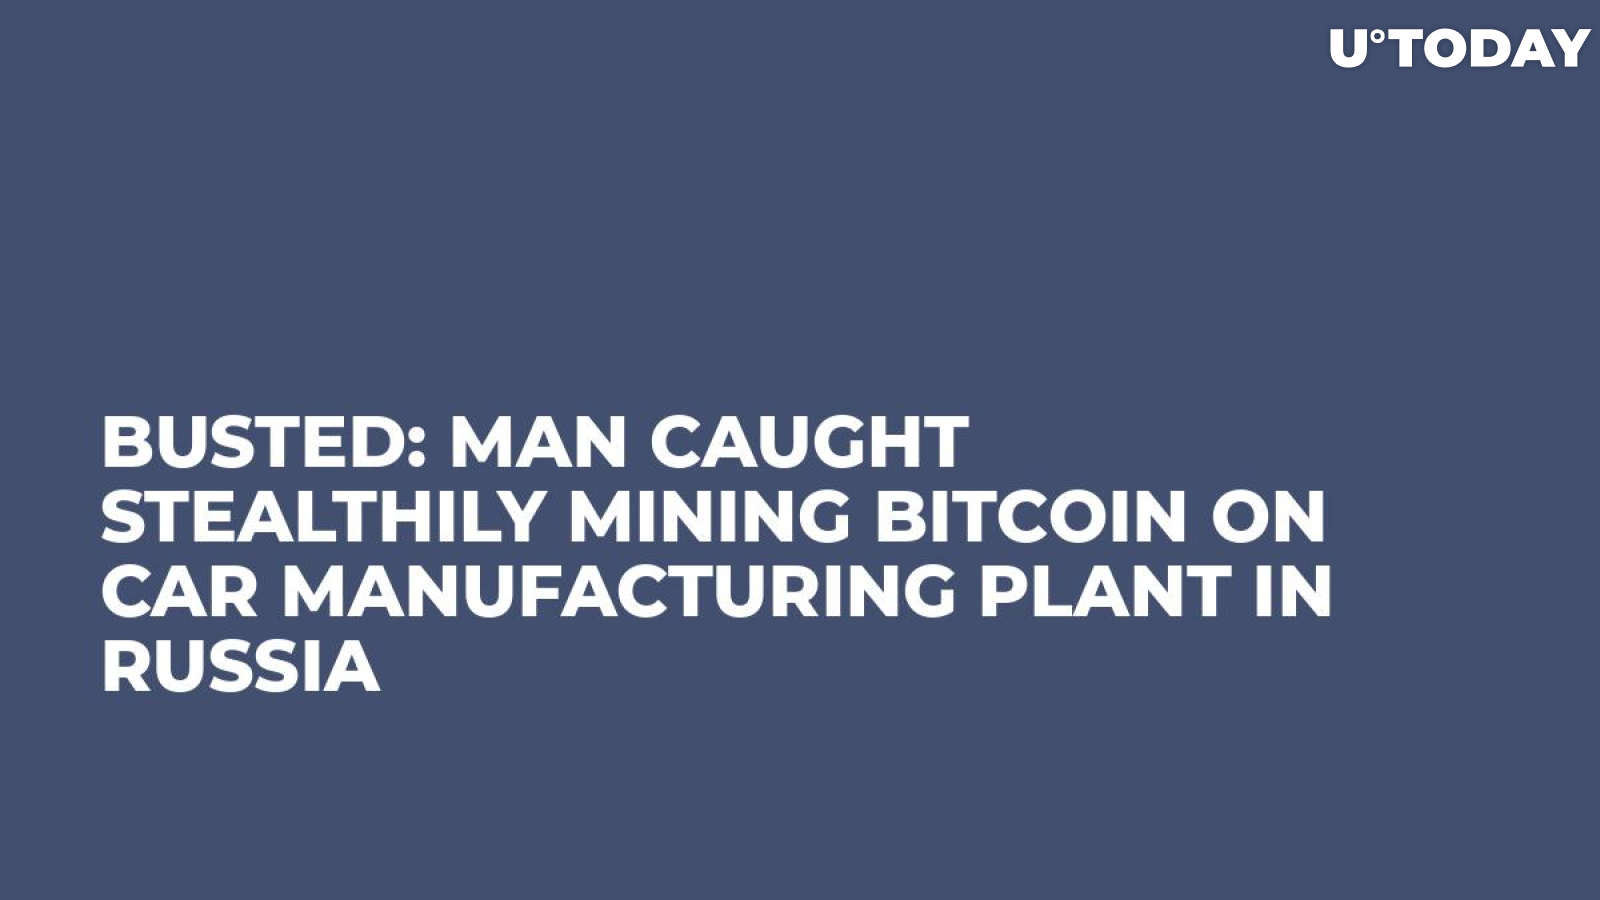 Busted: Man Caught Stealthily Mining Bitcoin on Car Manufacturing Plant in Russia